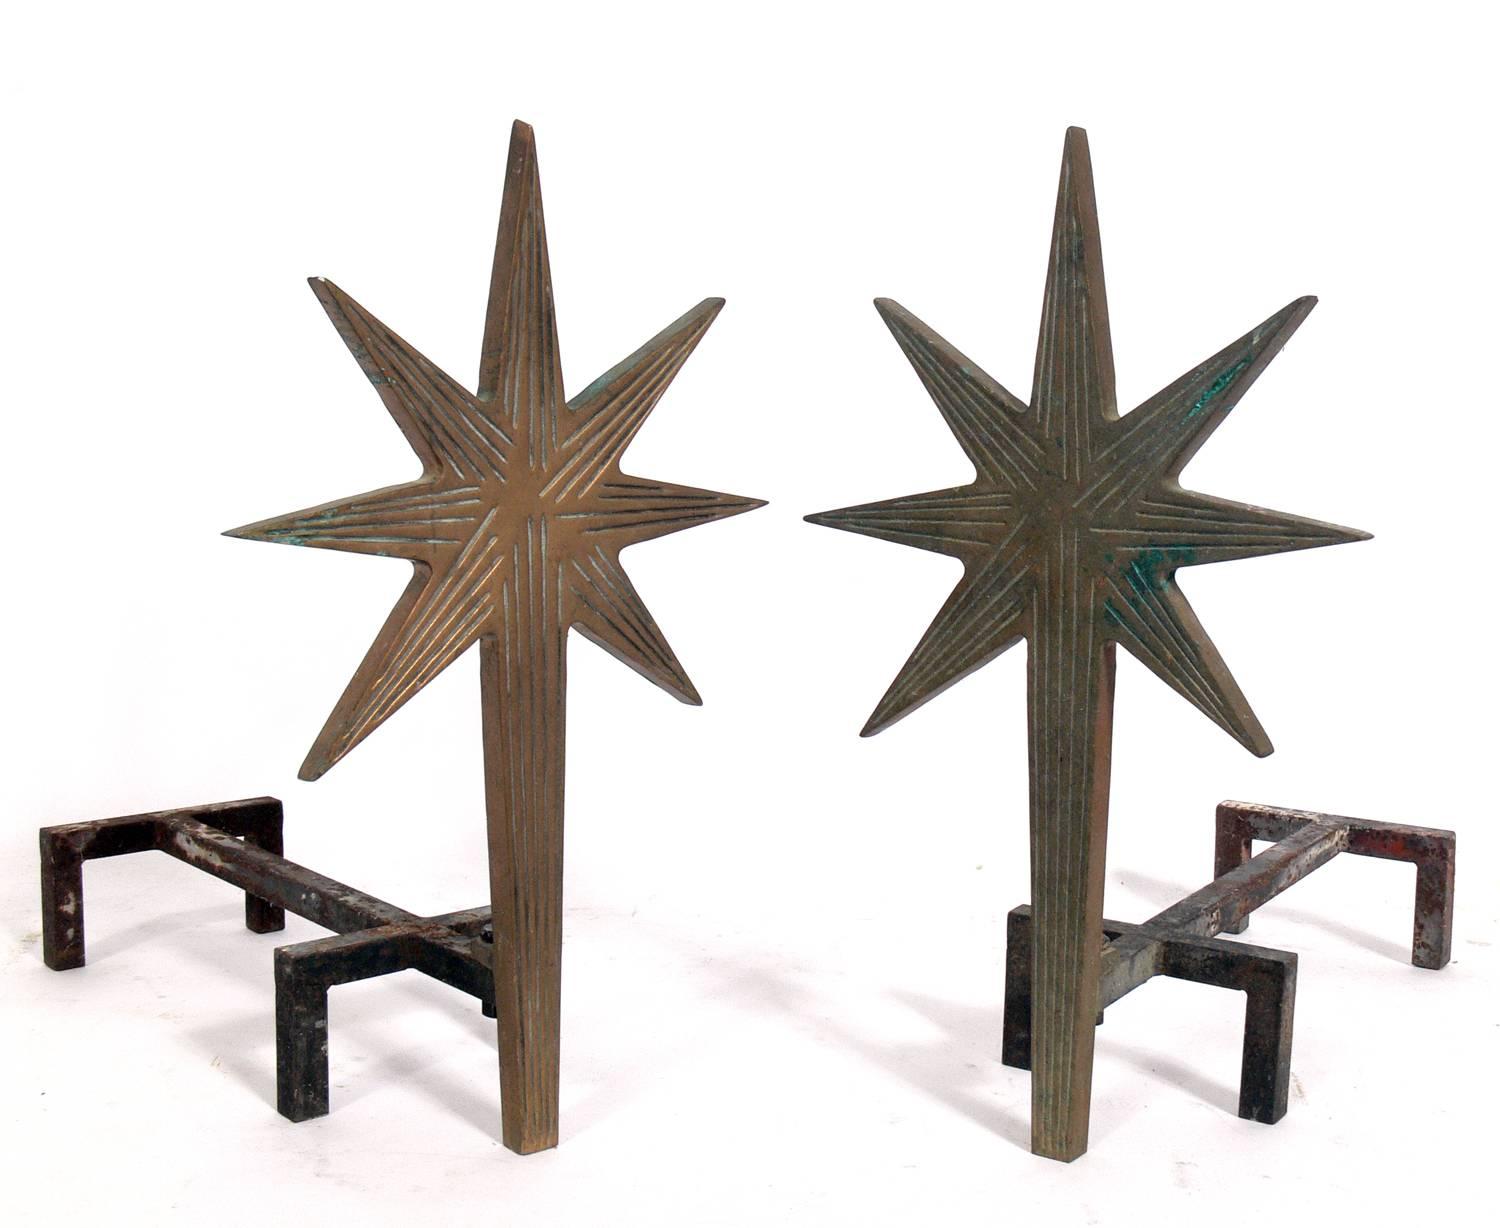 Sculptural andirons in the manner of Diego Giacometti, French, circa 1980s. These are probably unauthorized recasts made in the 1980s after Giacometti's 